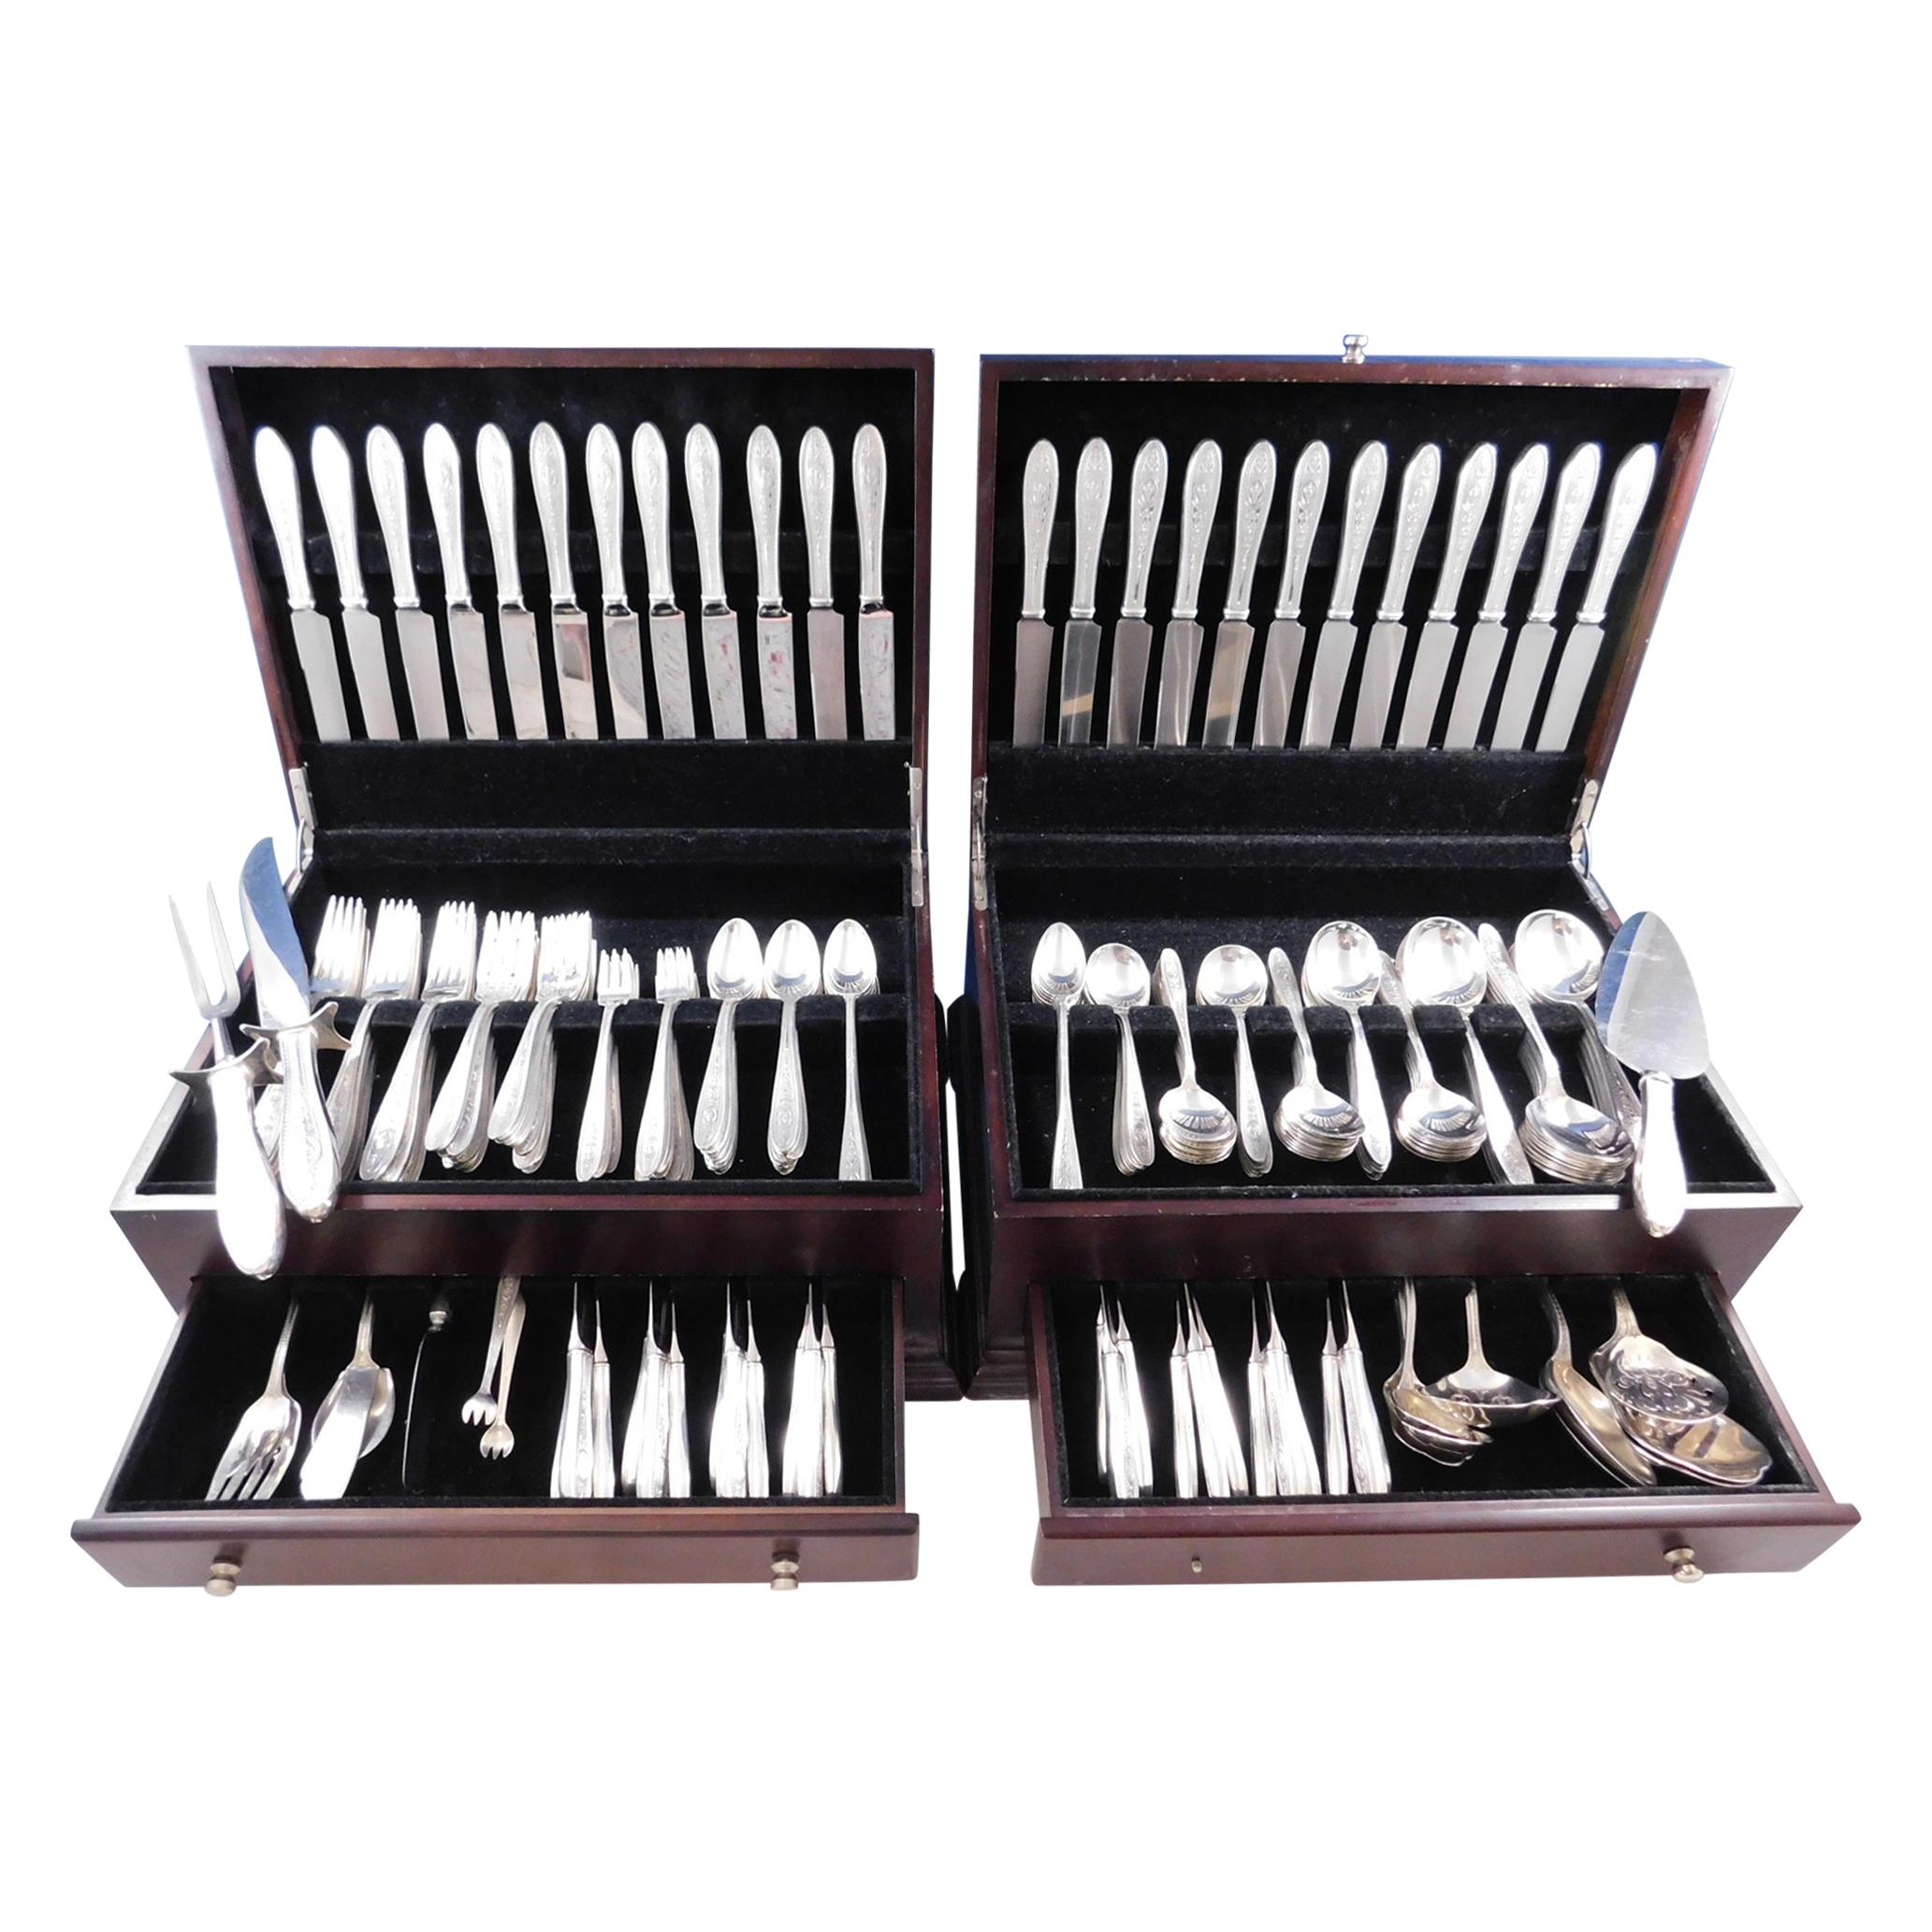 Wedgwood by International Sterling Silver Flatware Set 24 Service 258 Pieces